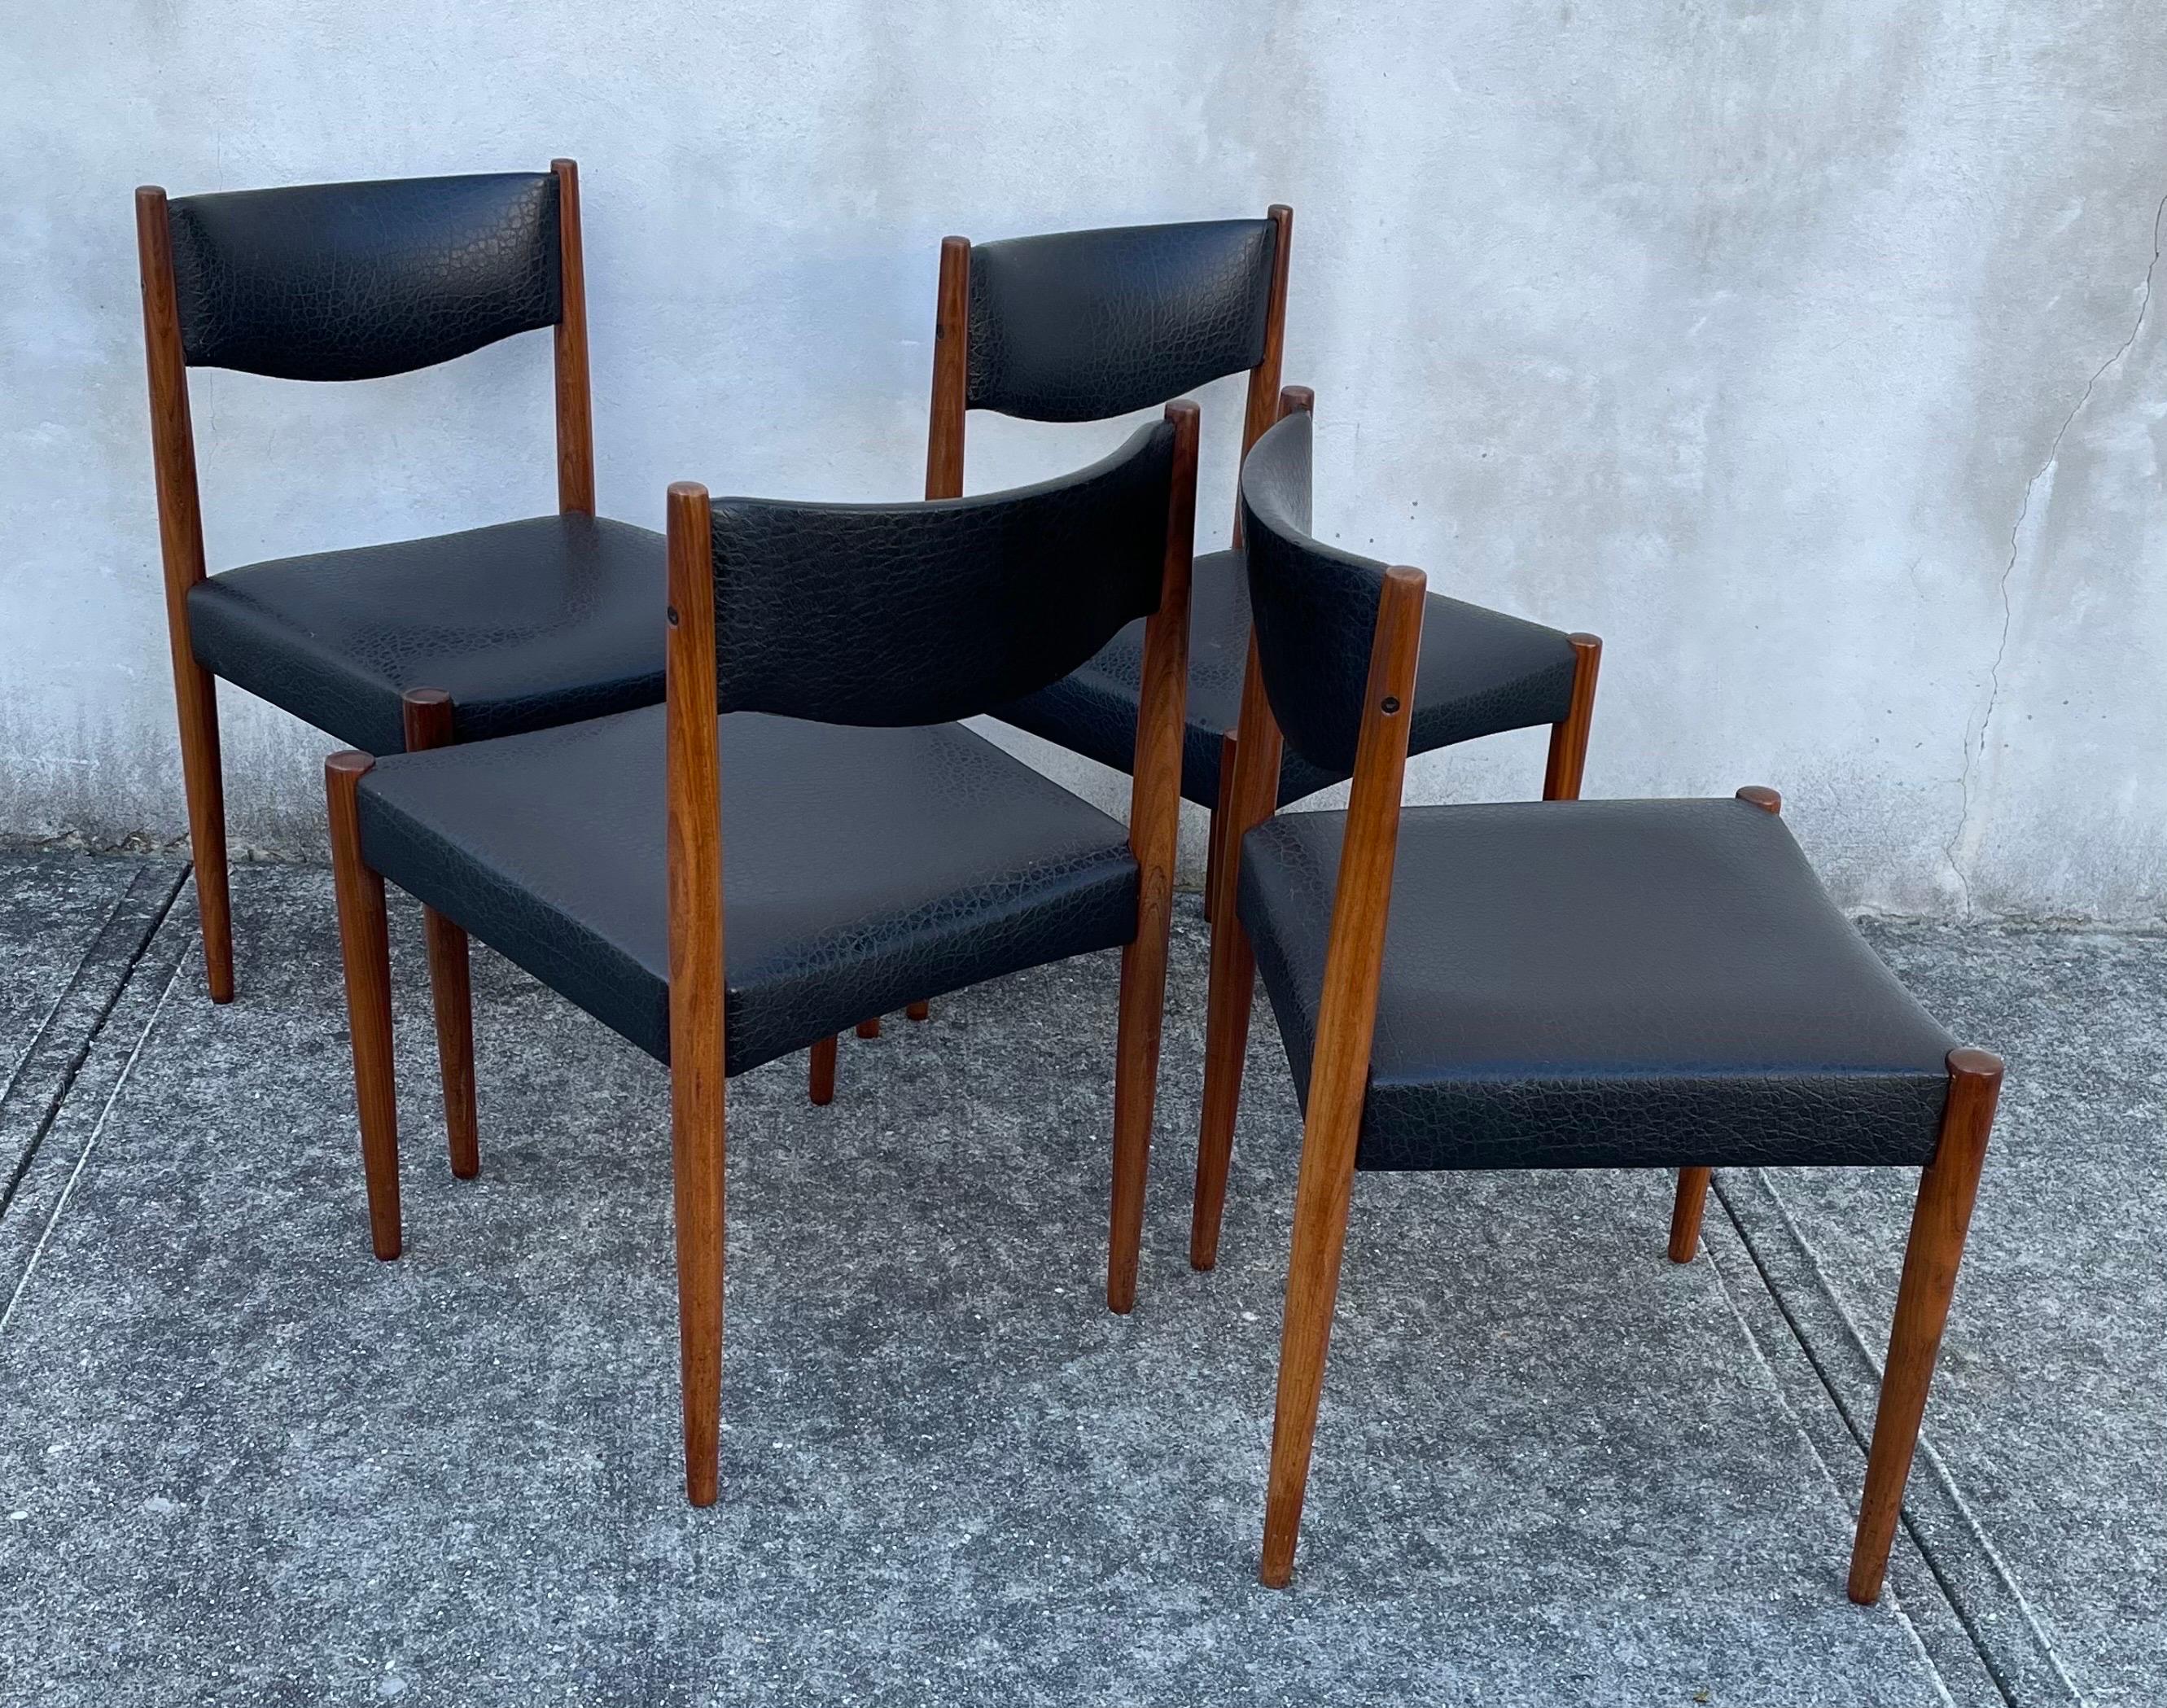 Set of Four Mid-Century Modern Teak Dining Chairs, Faux Black Leather Seats For Sale 1